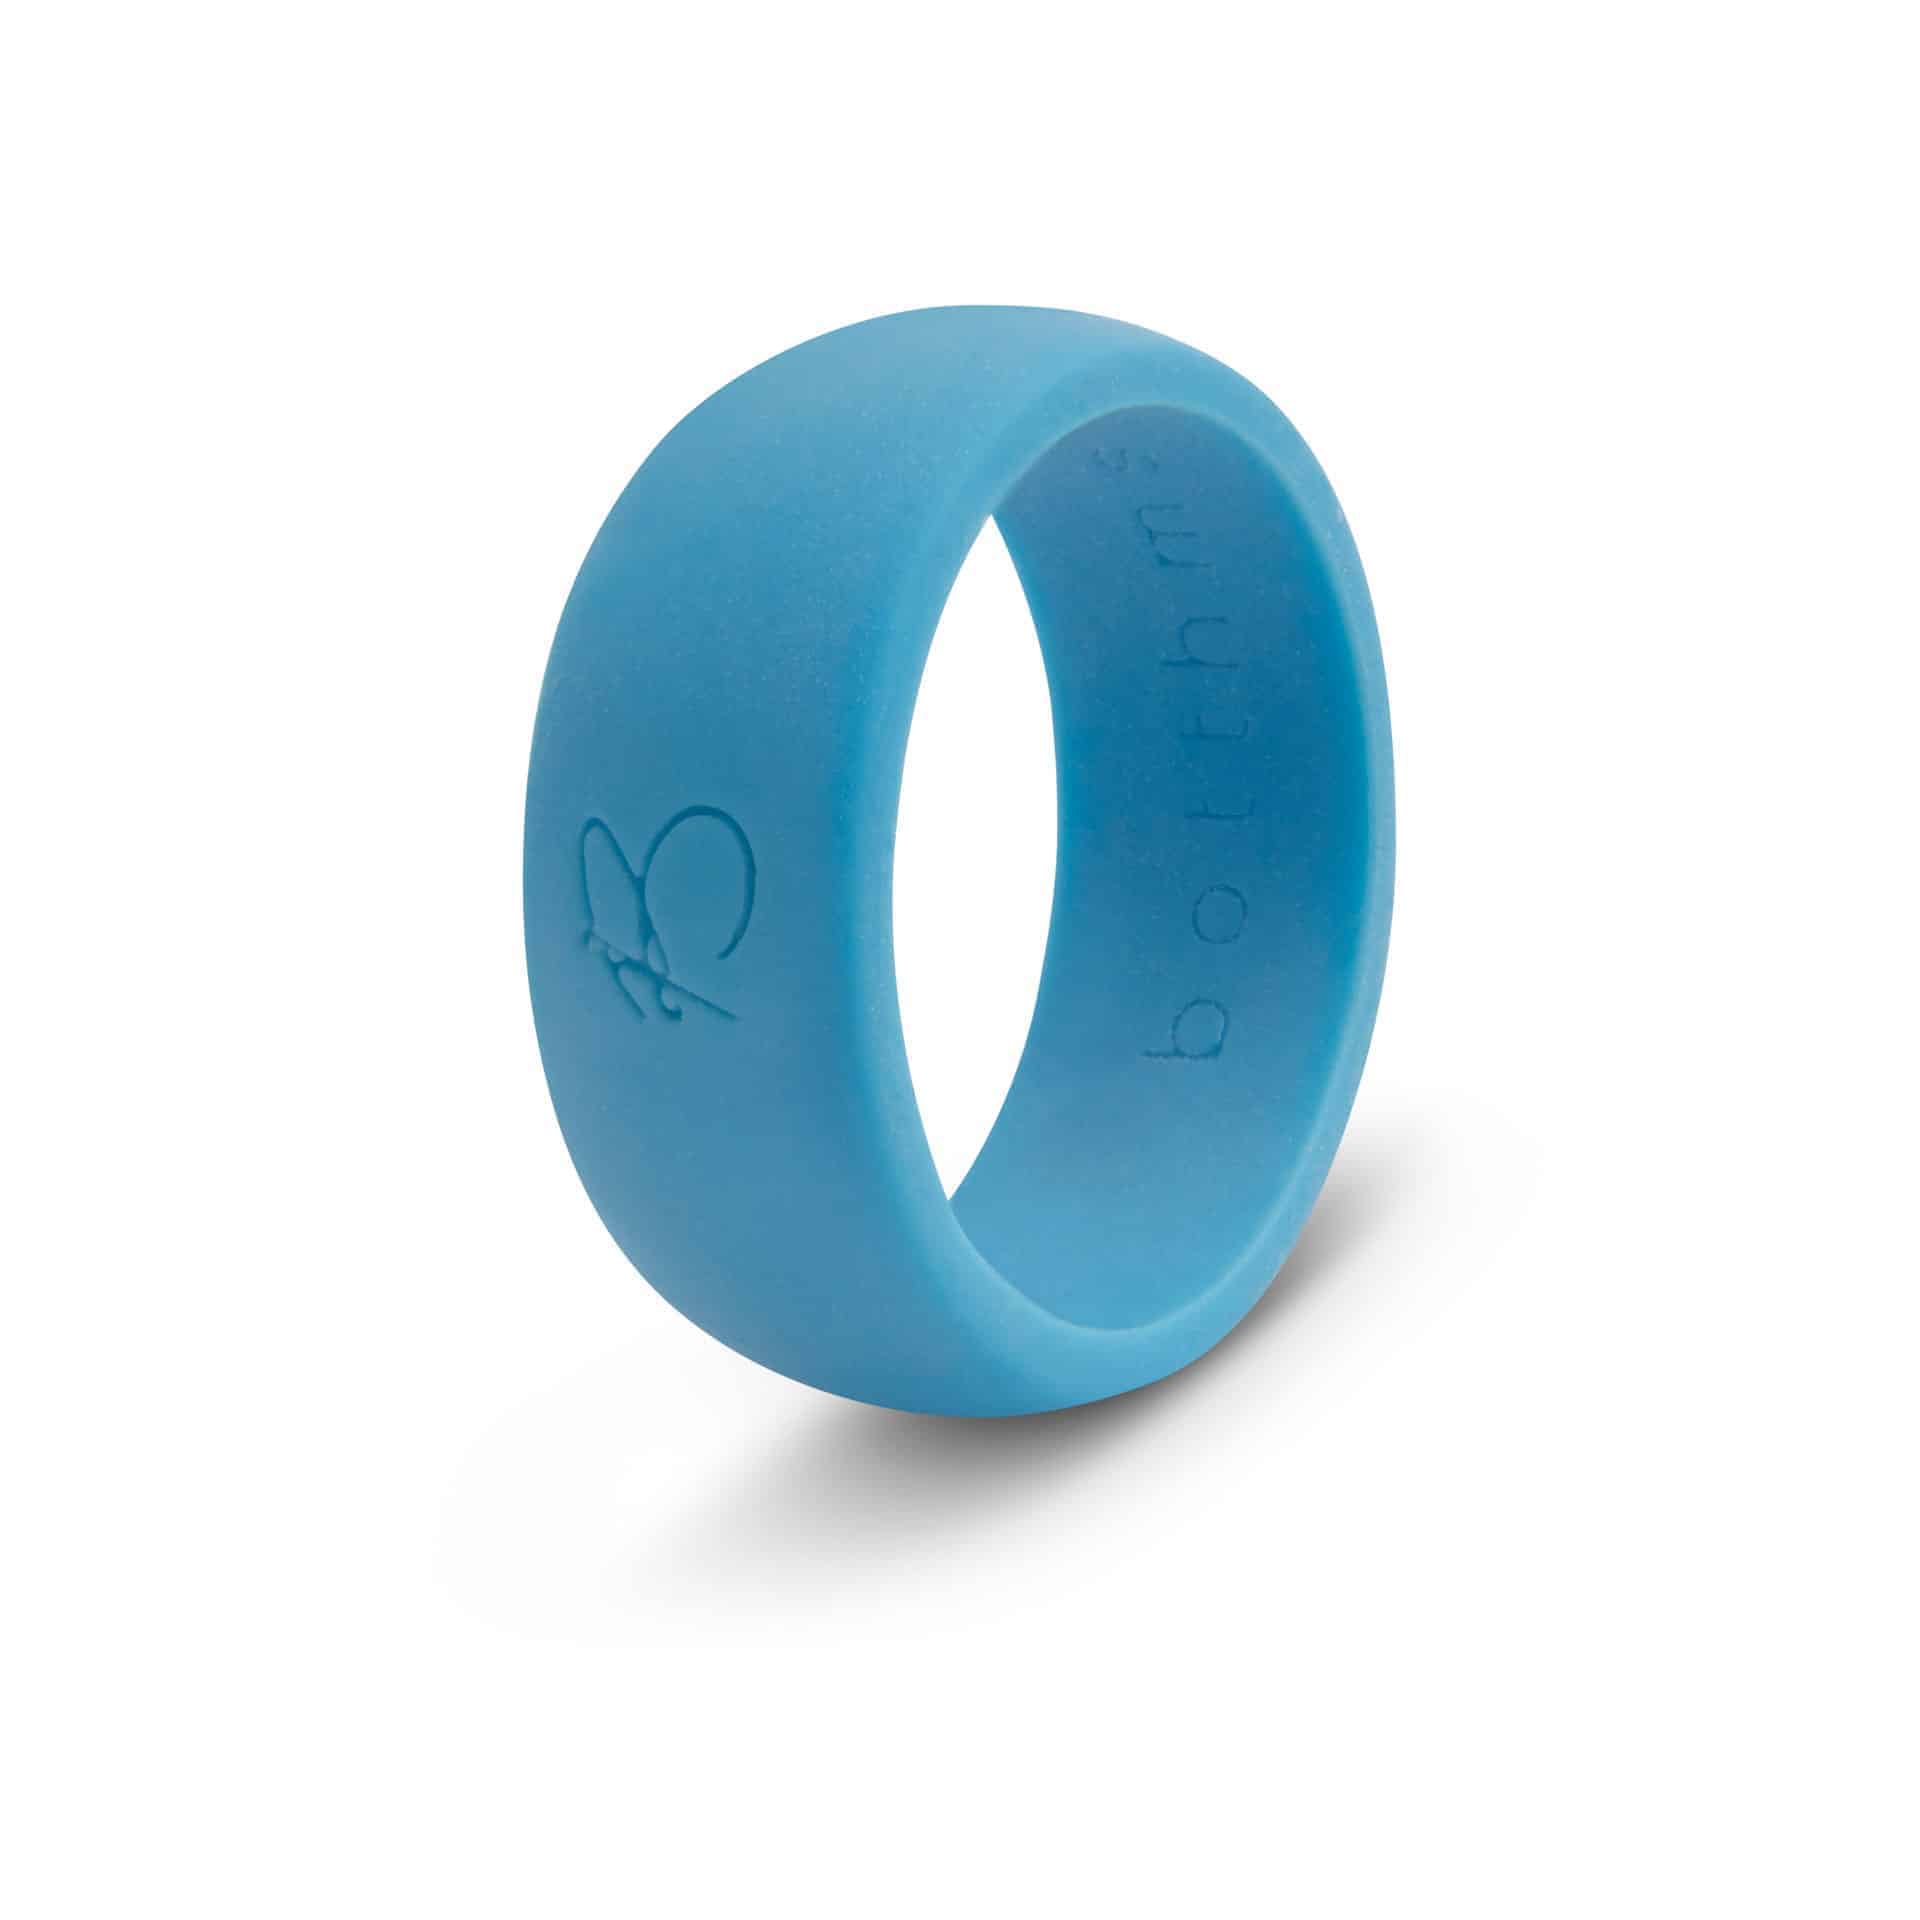 products/BTTHMS_RING_LightBlue.jpgproducts/BTTHMS_RING_BOX_LightBlue.jpgproducts/IMG_9417.jpgproducts/IMG_9361.jpg